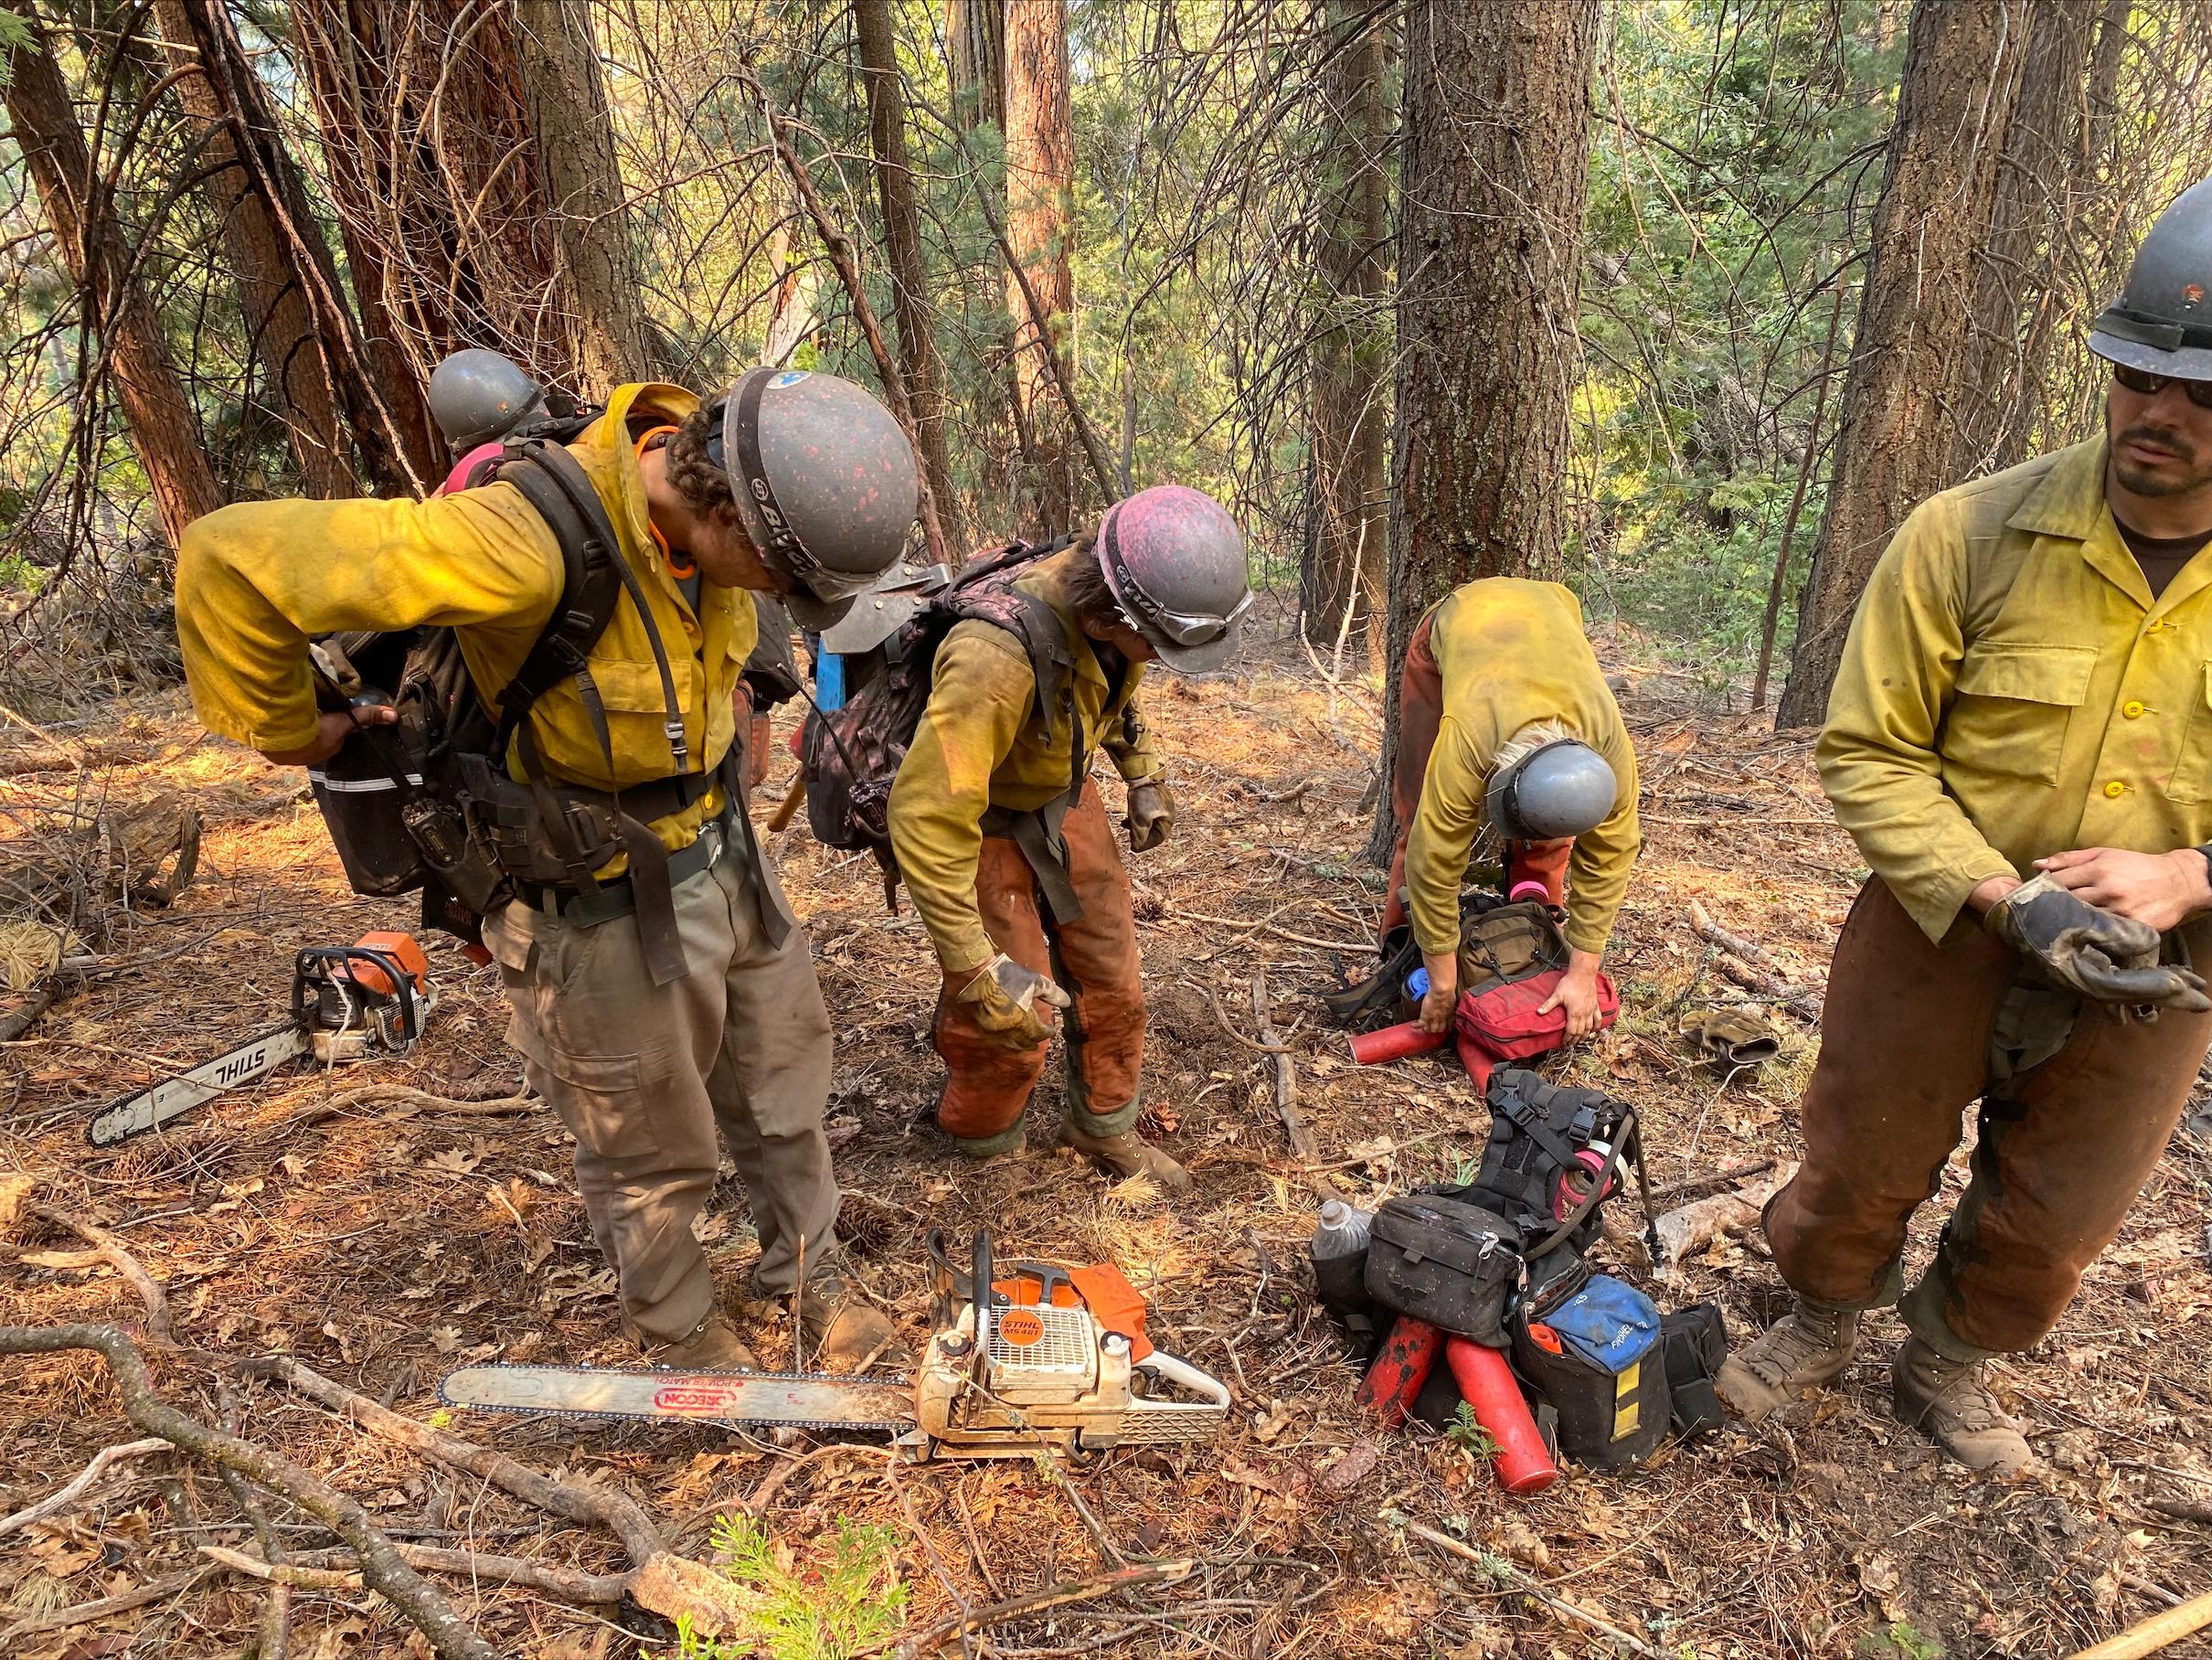 Saw teams on Yosemite National Parks Wildland Fire Module Crew 1 work quickly to refuel and rehab their tools while on the fire line.